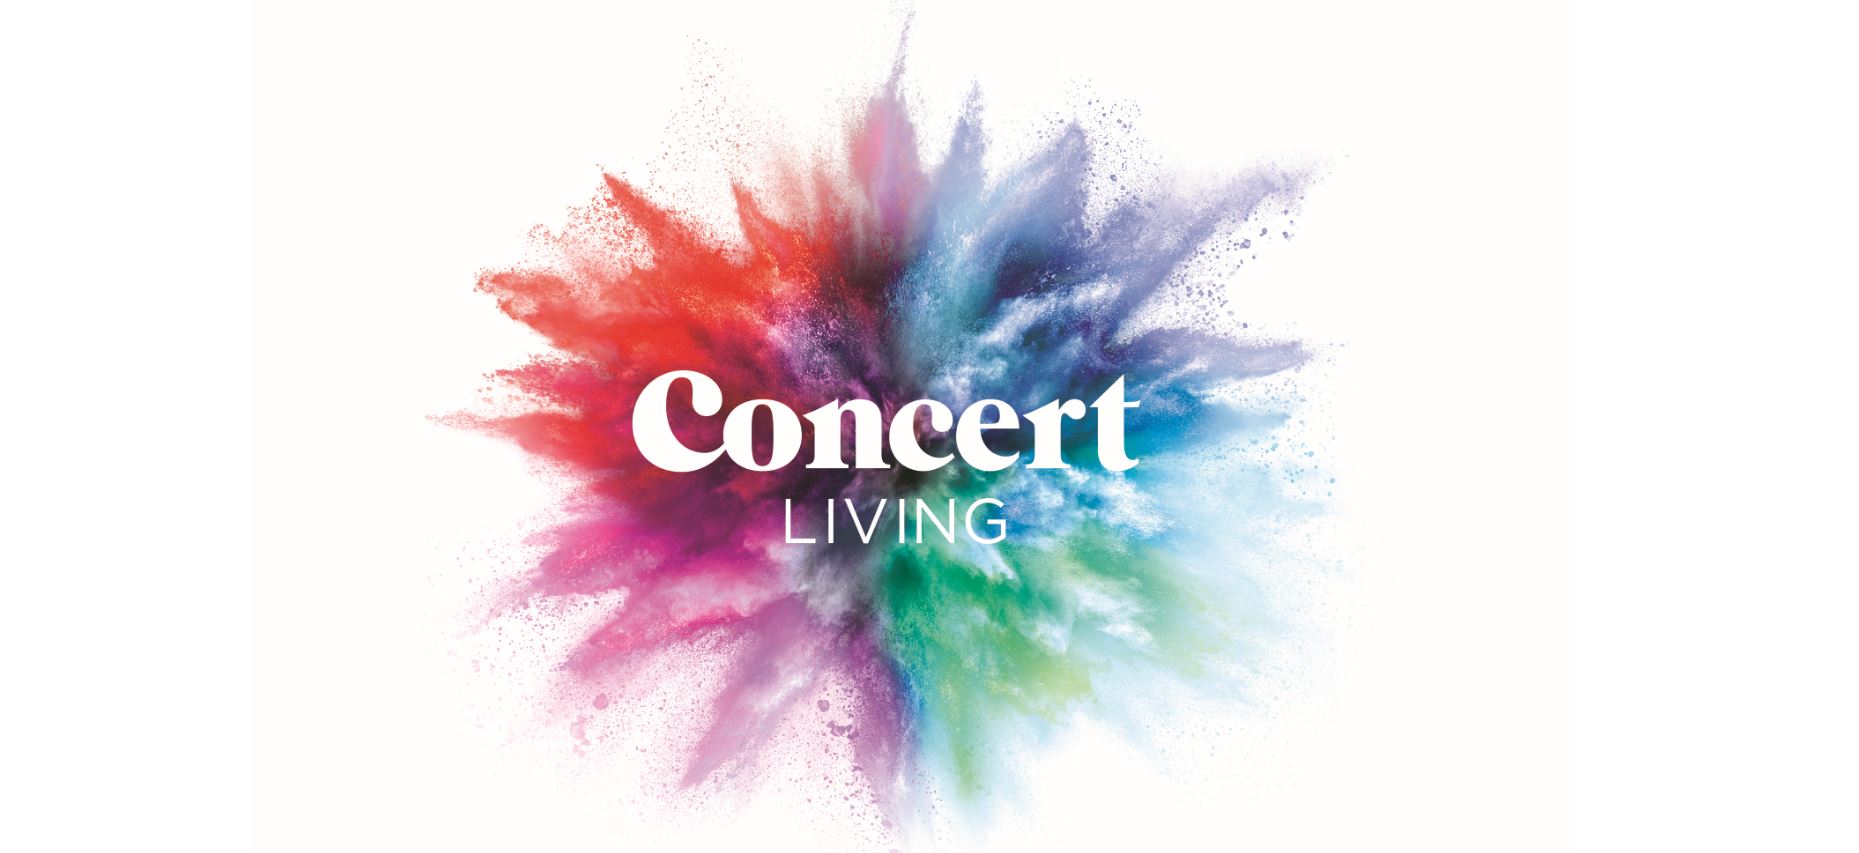 We would like to welcome Concert Living to ContactBuilder.